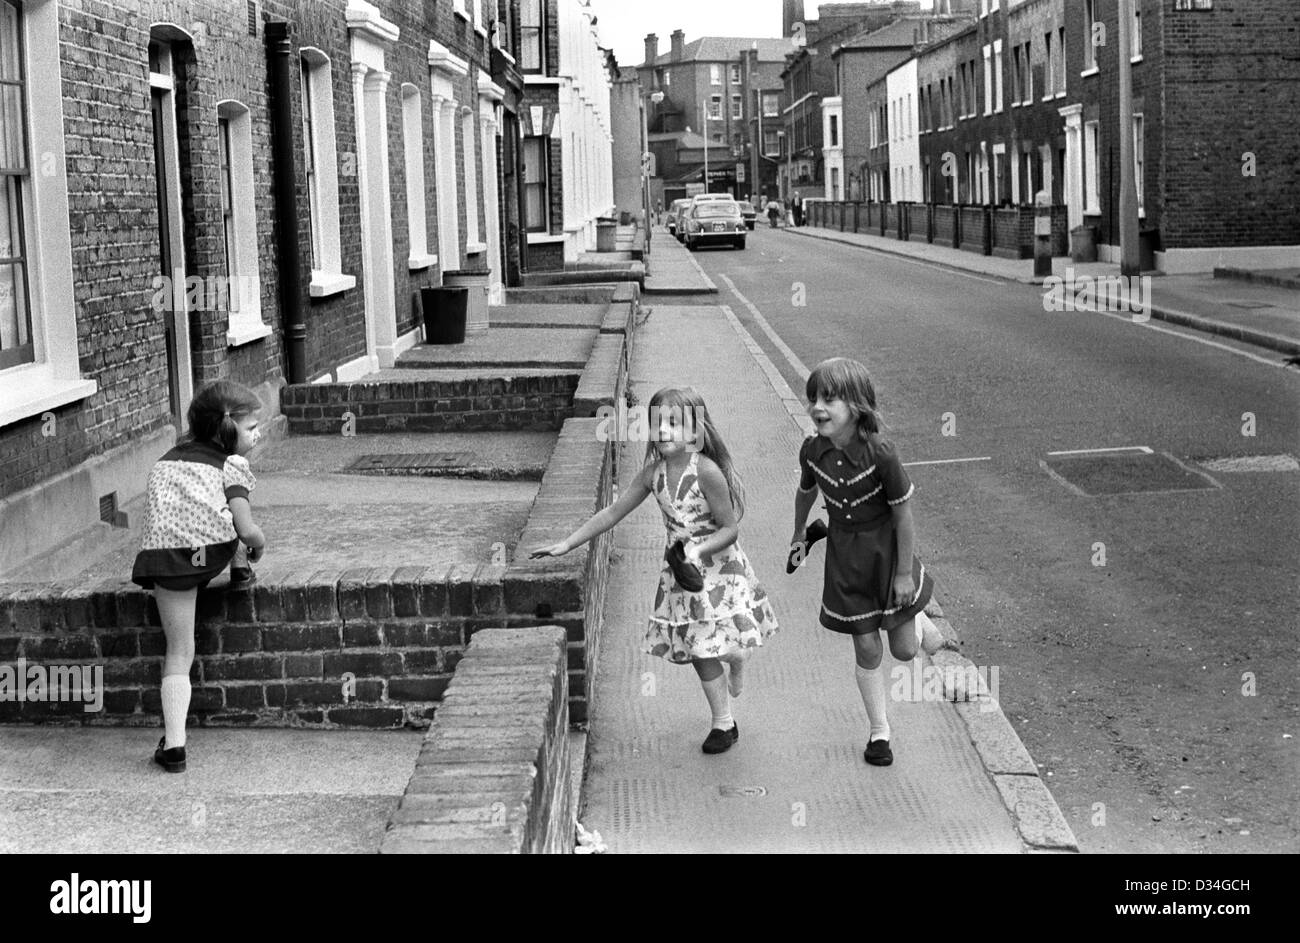 Children, girls playing safely in the street hopping on one foot. Elephant and Castle, SE London. 1970s Uk 1975 HOMER SYKES Stock Photo